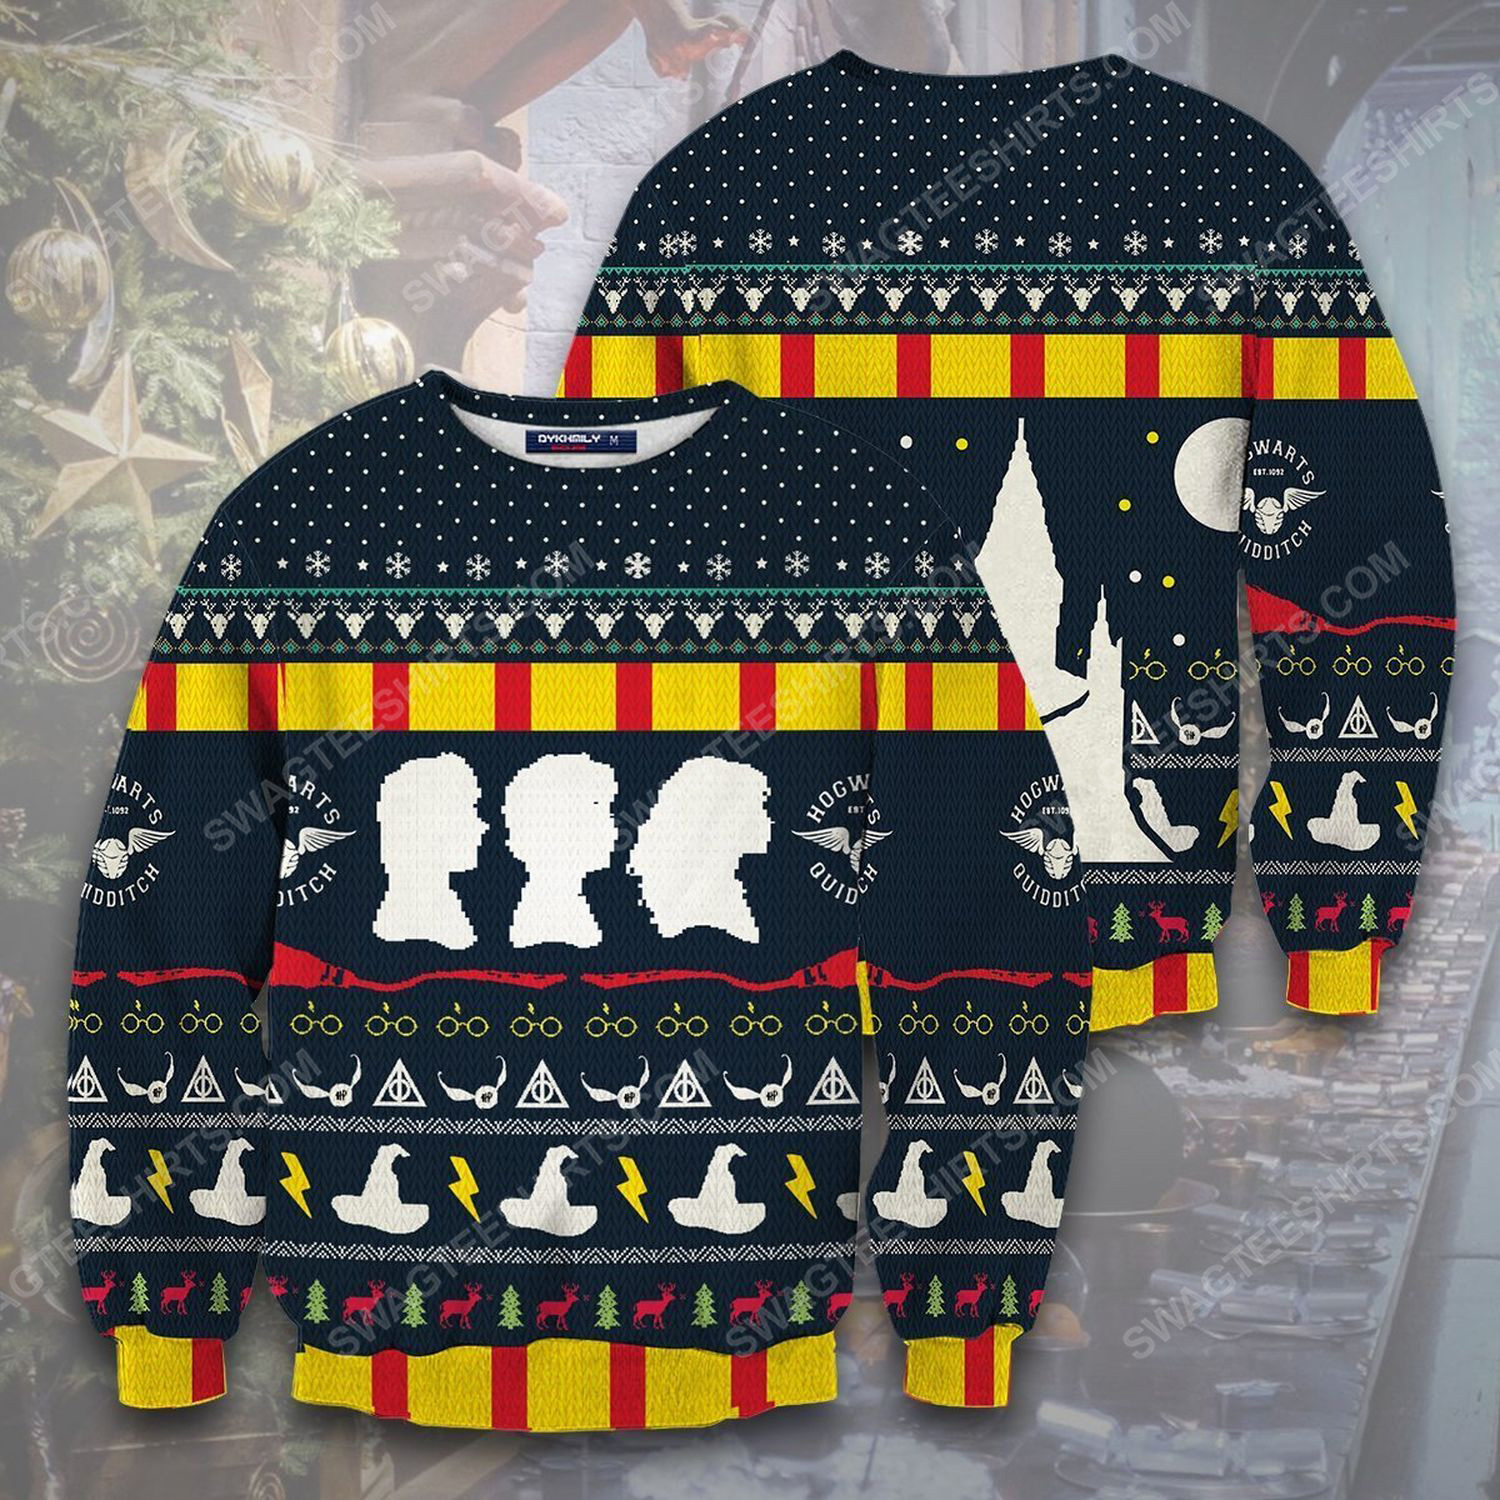 Magical harry potter full print ugly christmas sweater 2